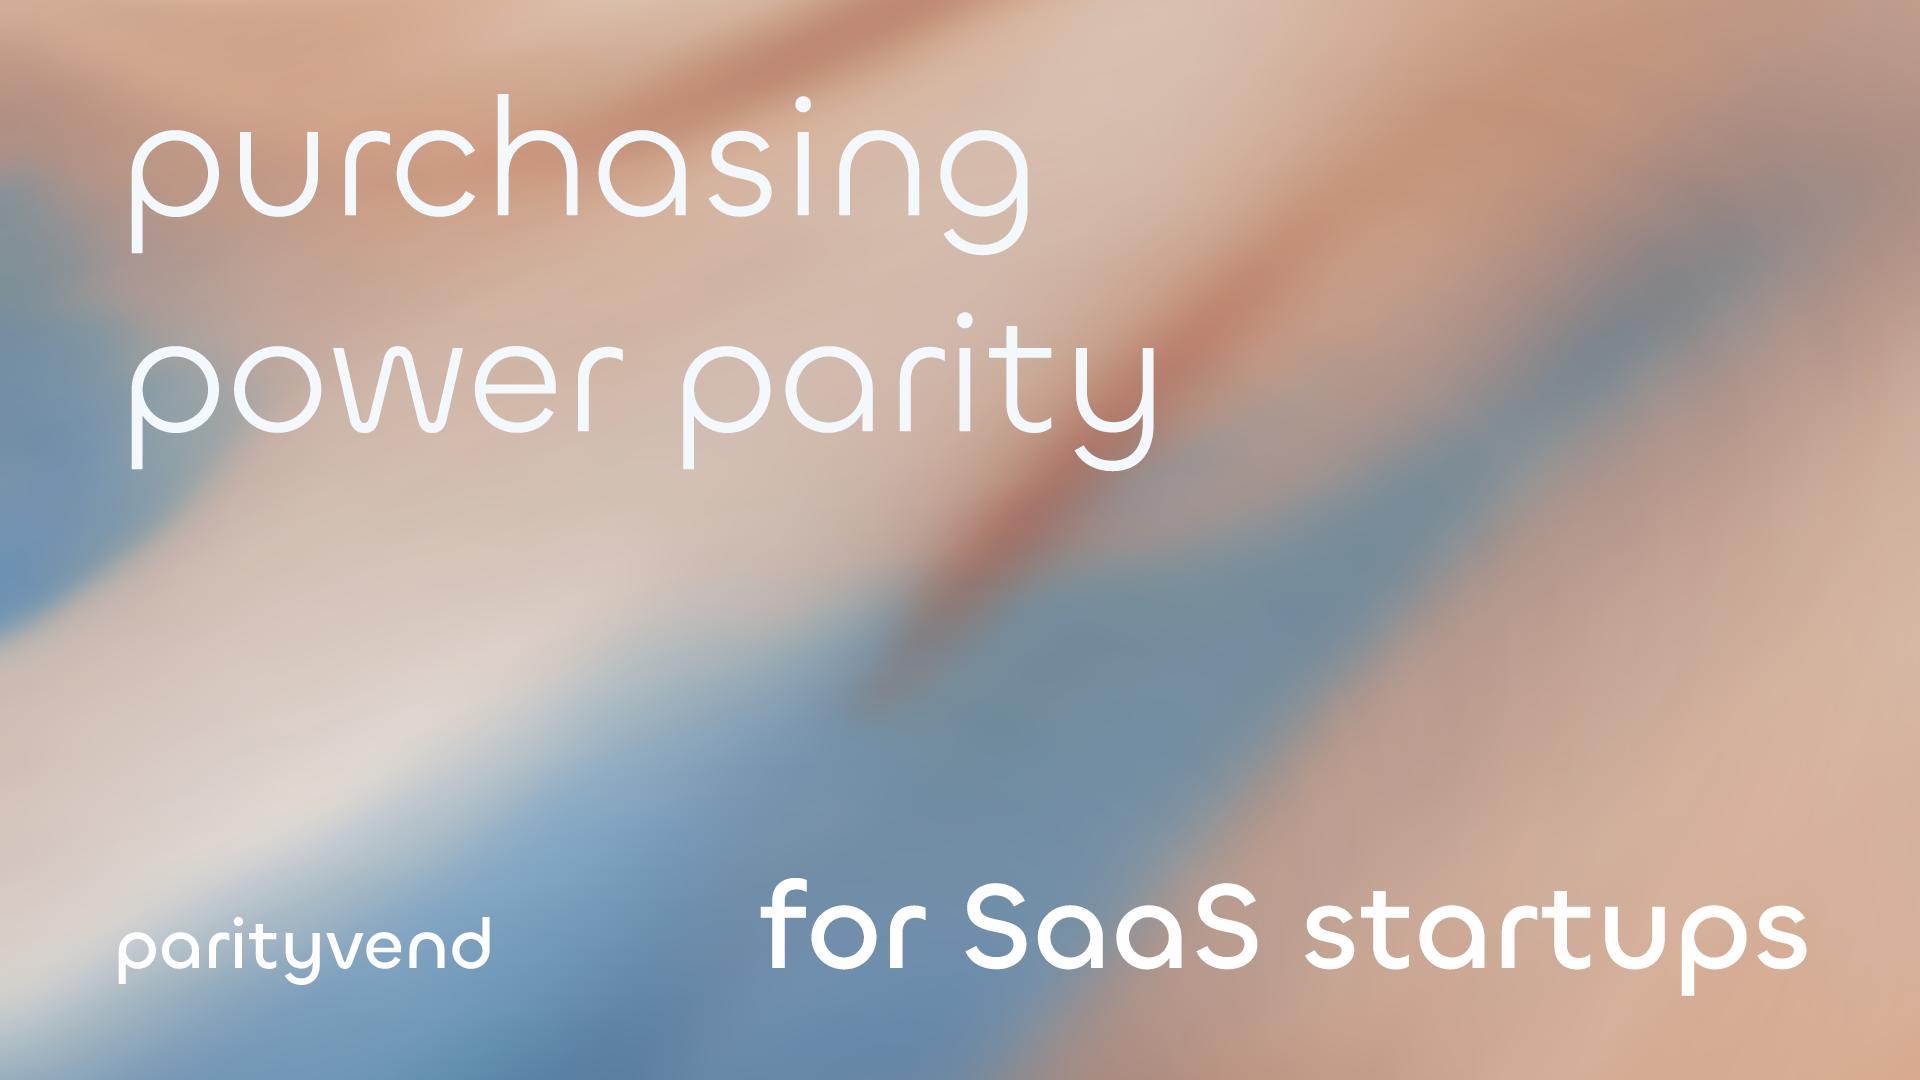 <span style="display: inline-block; margin-bottom: 0.5rem; font-weight: 500;">Using Purchasing Power Parity for SaaS Startups</span>